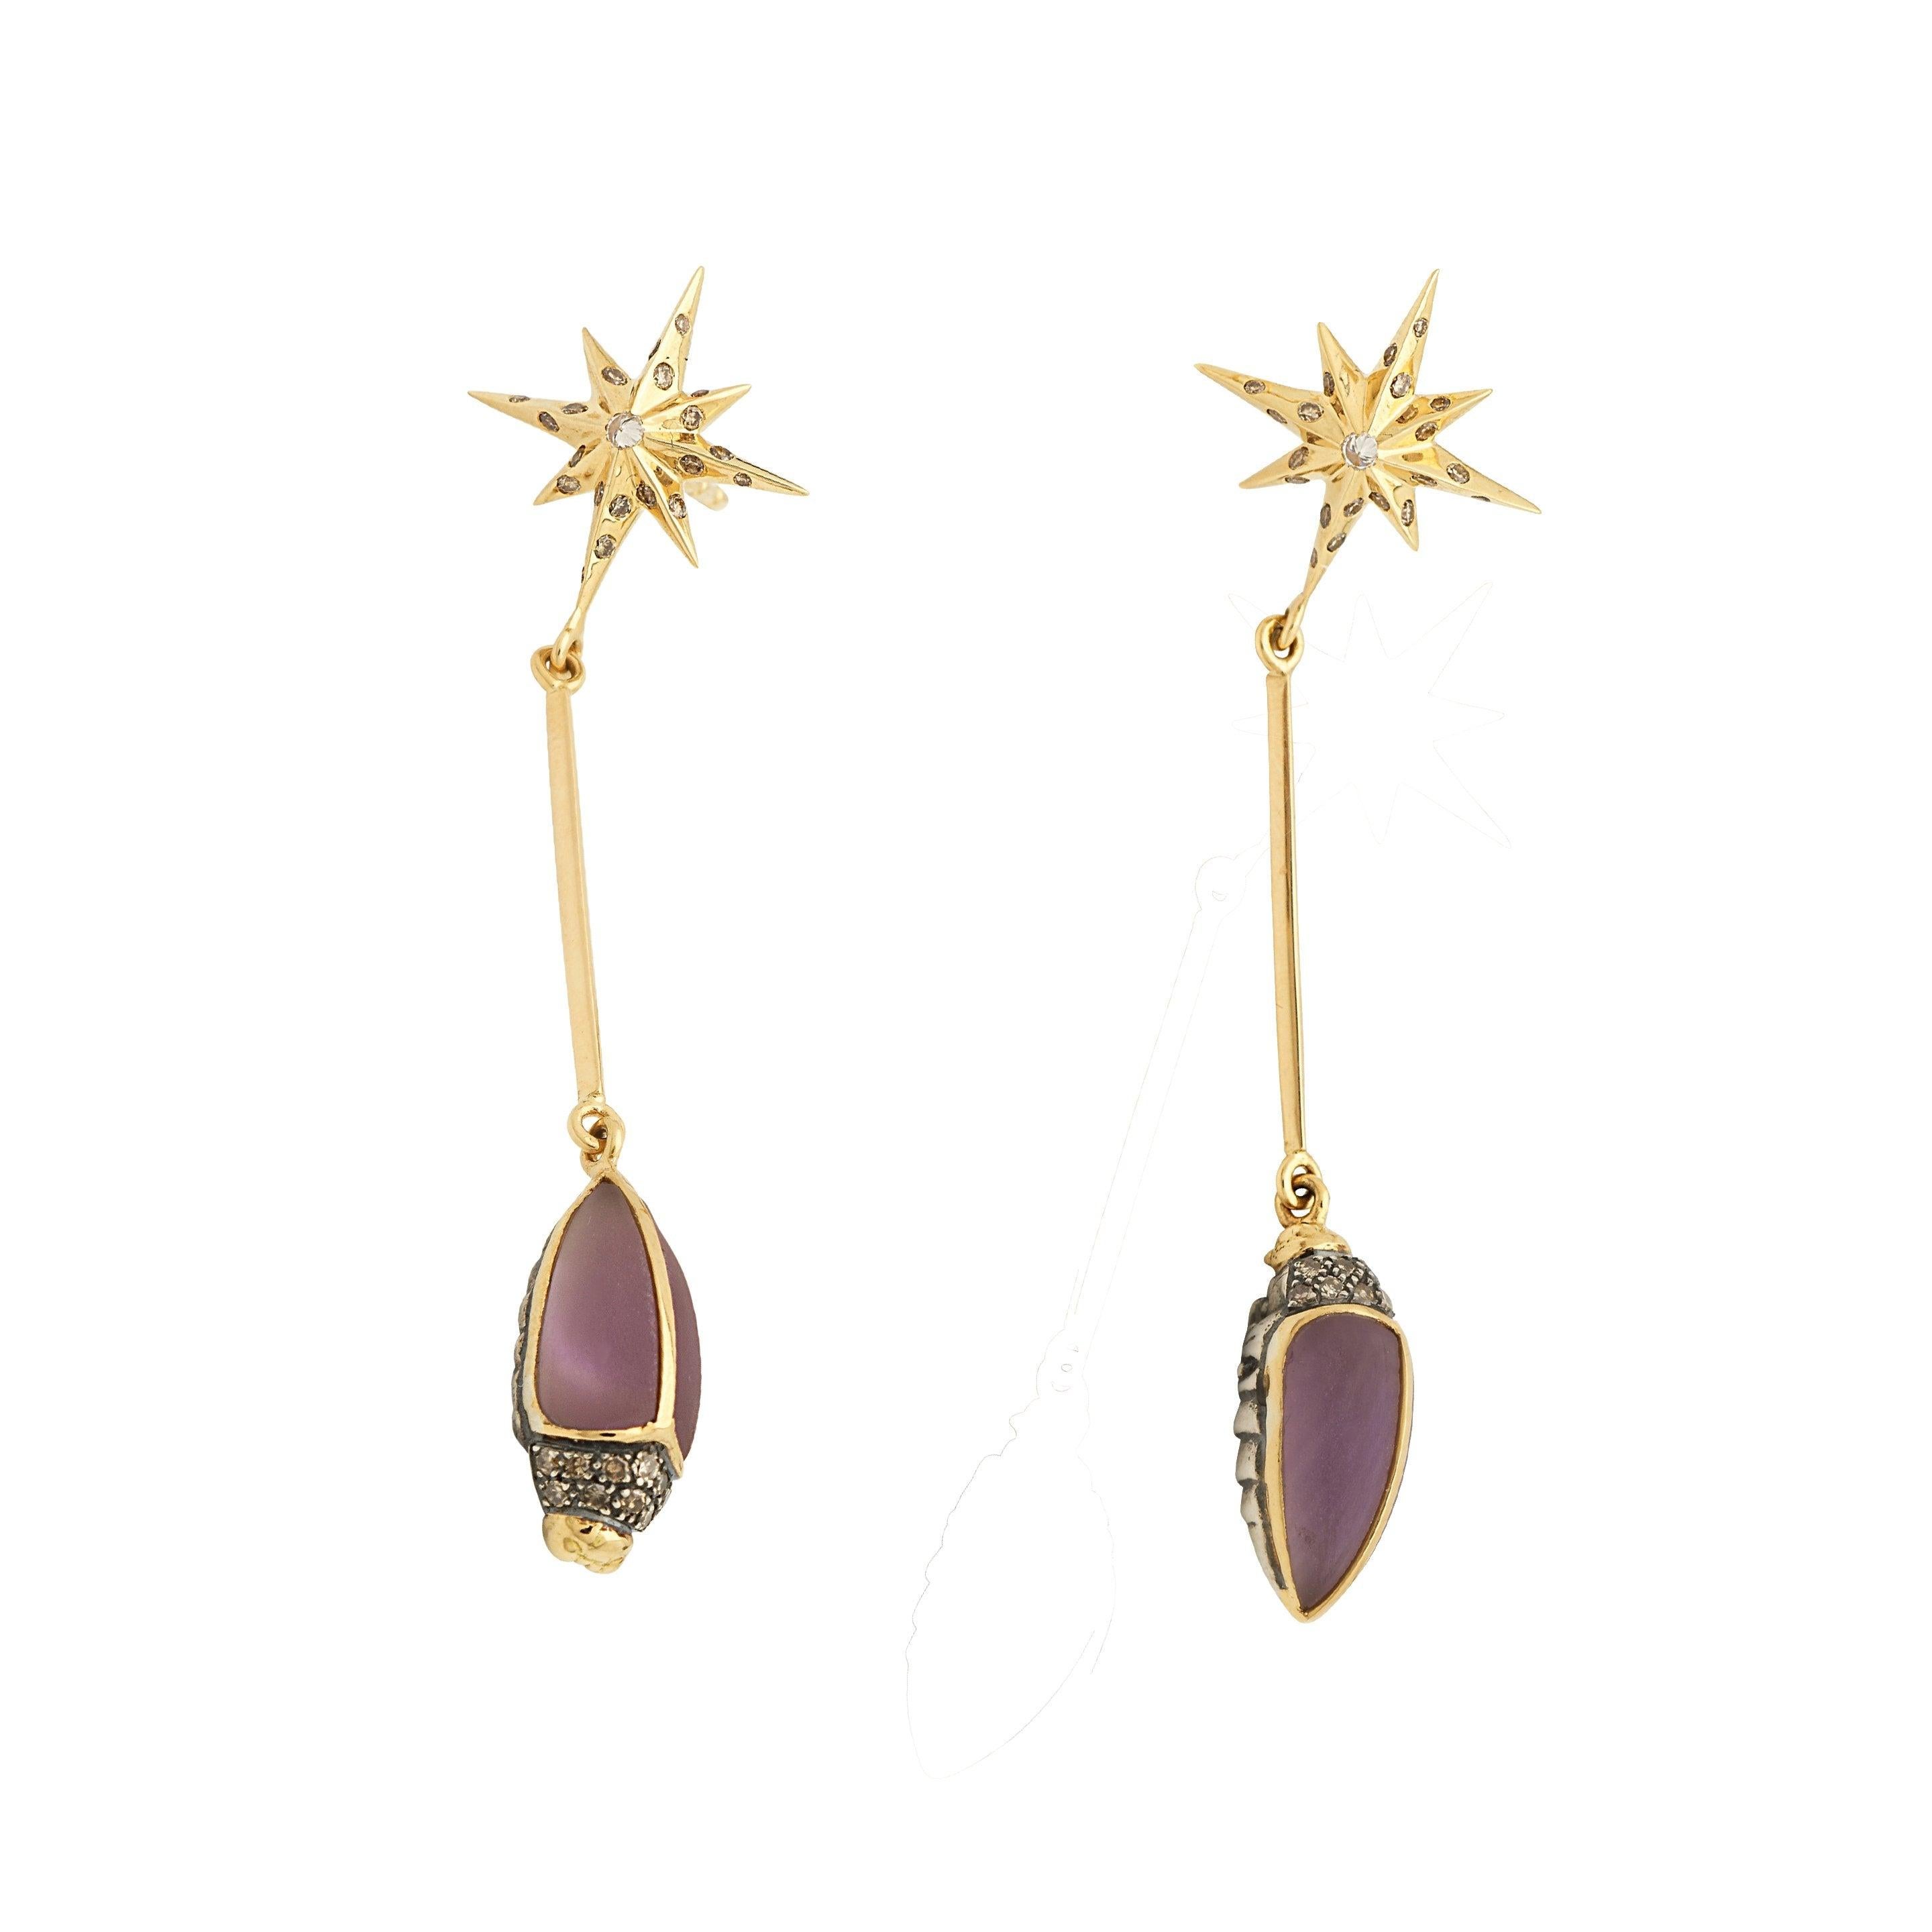 Sleek and graphic, these drop earrings are crafted as fine bars in 18k yellow gold, and are set with dazzling, diamond-embellished star motifs at the posts. The scarab motifs at the drop are fashioned in 18k yellow gold and sterling silver, and set